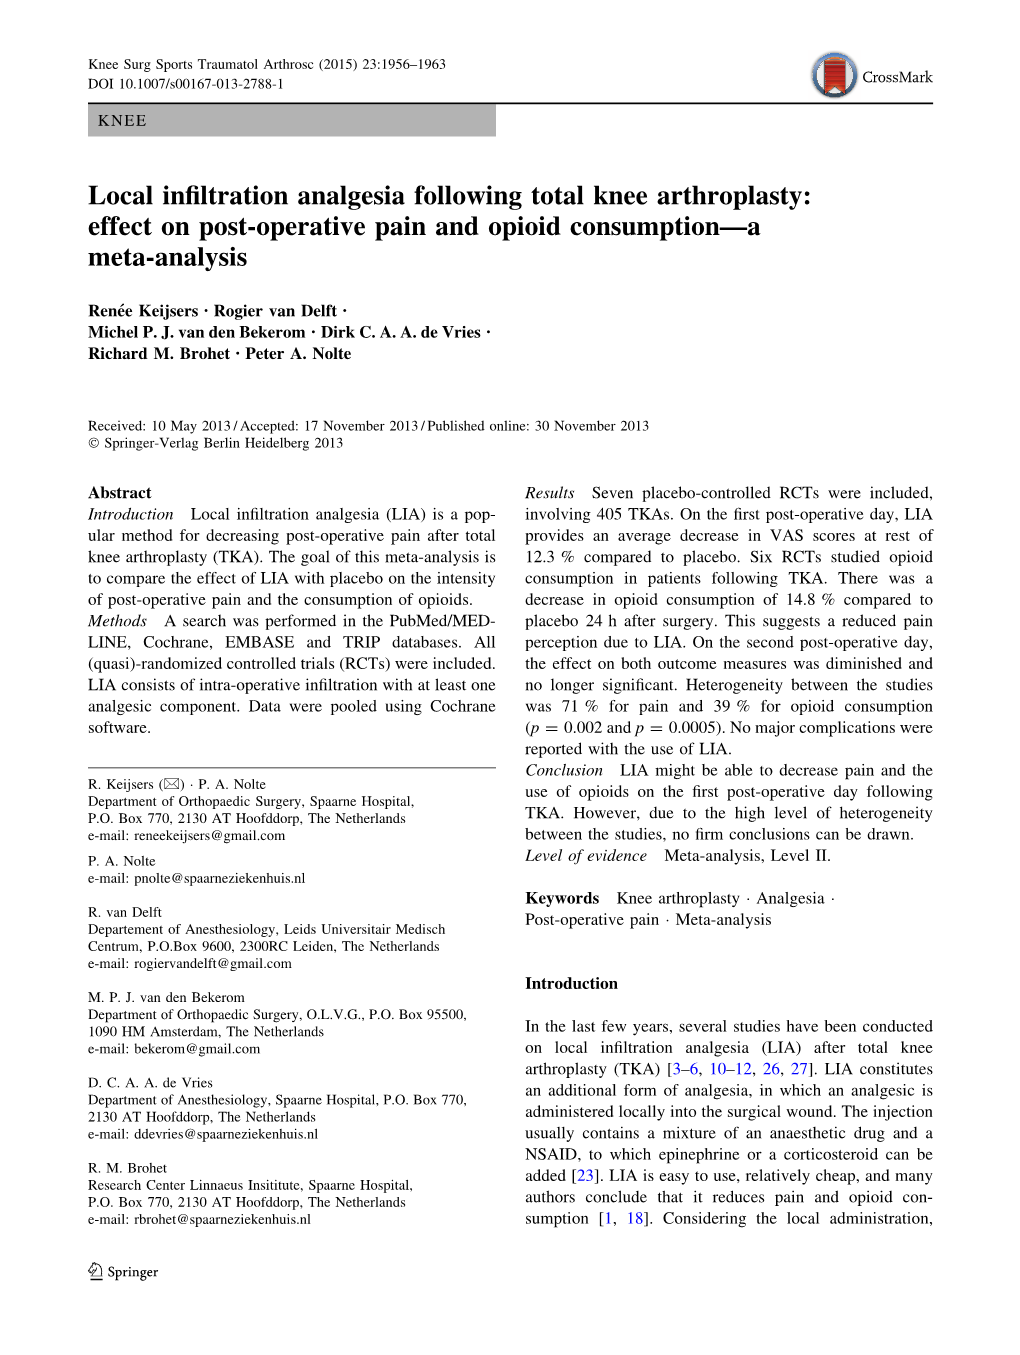 Local Infiltration Analgesia Following Total Knee Arthroplasty